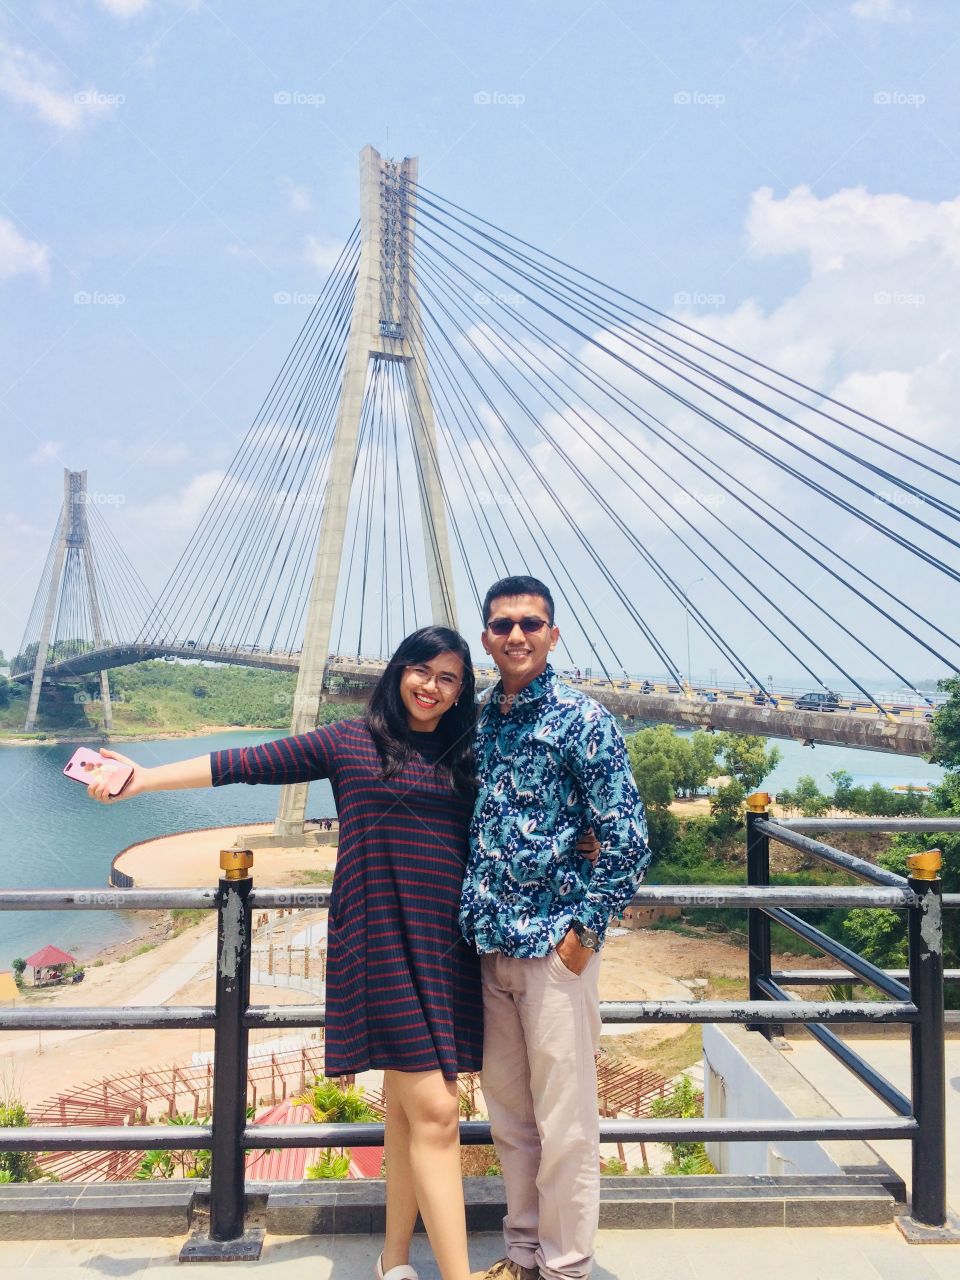 Spread your laugh and smile to everyone. Location: Barelang Bridge, Batam, Indonesia 